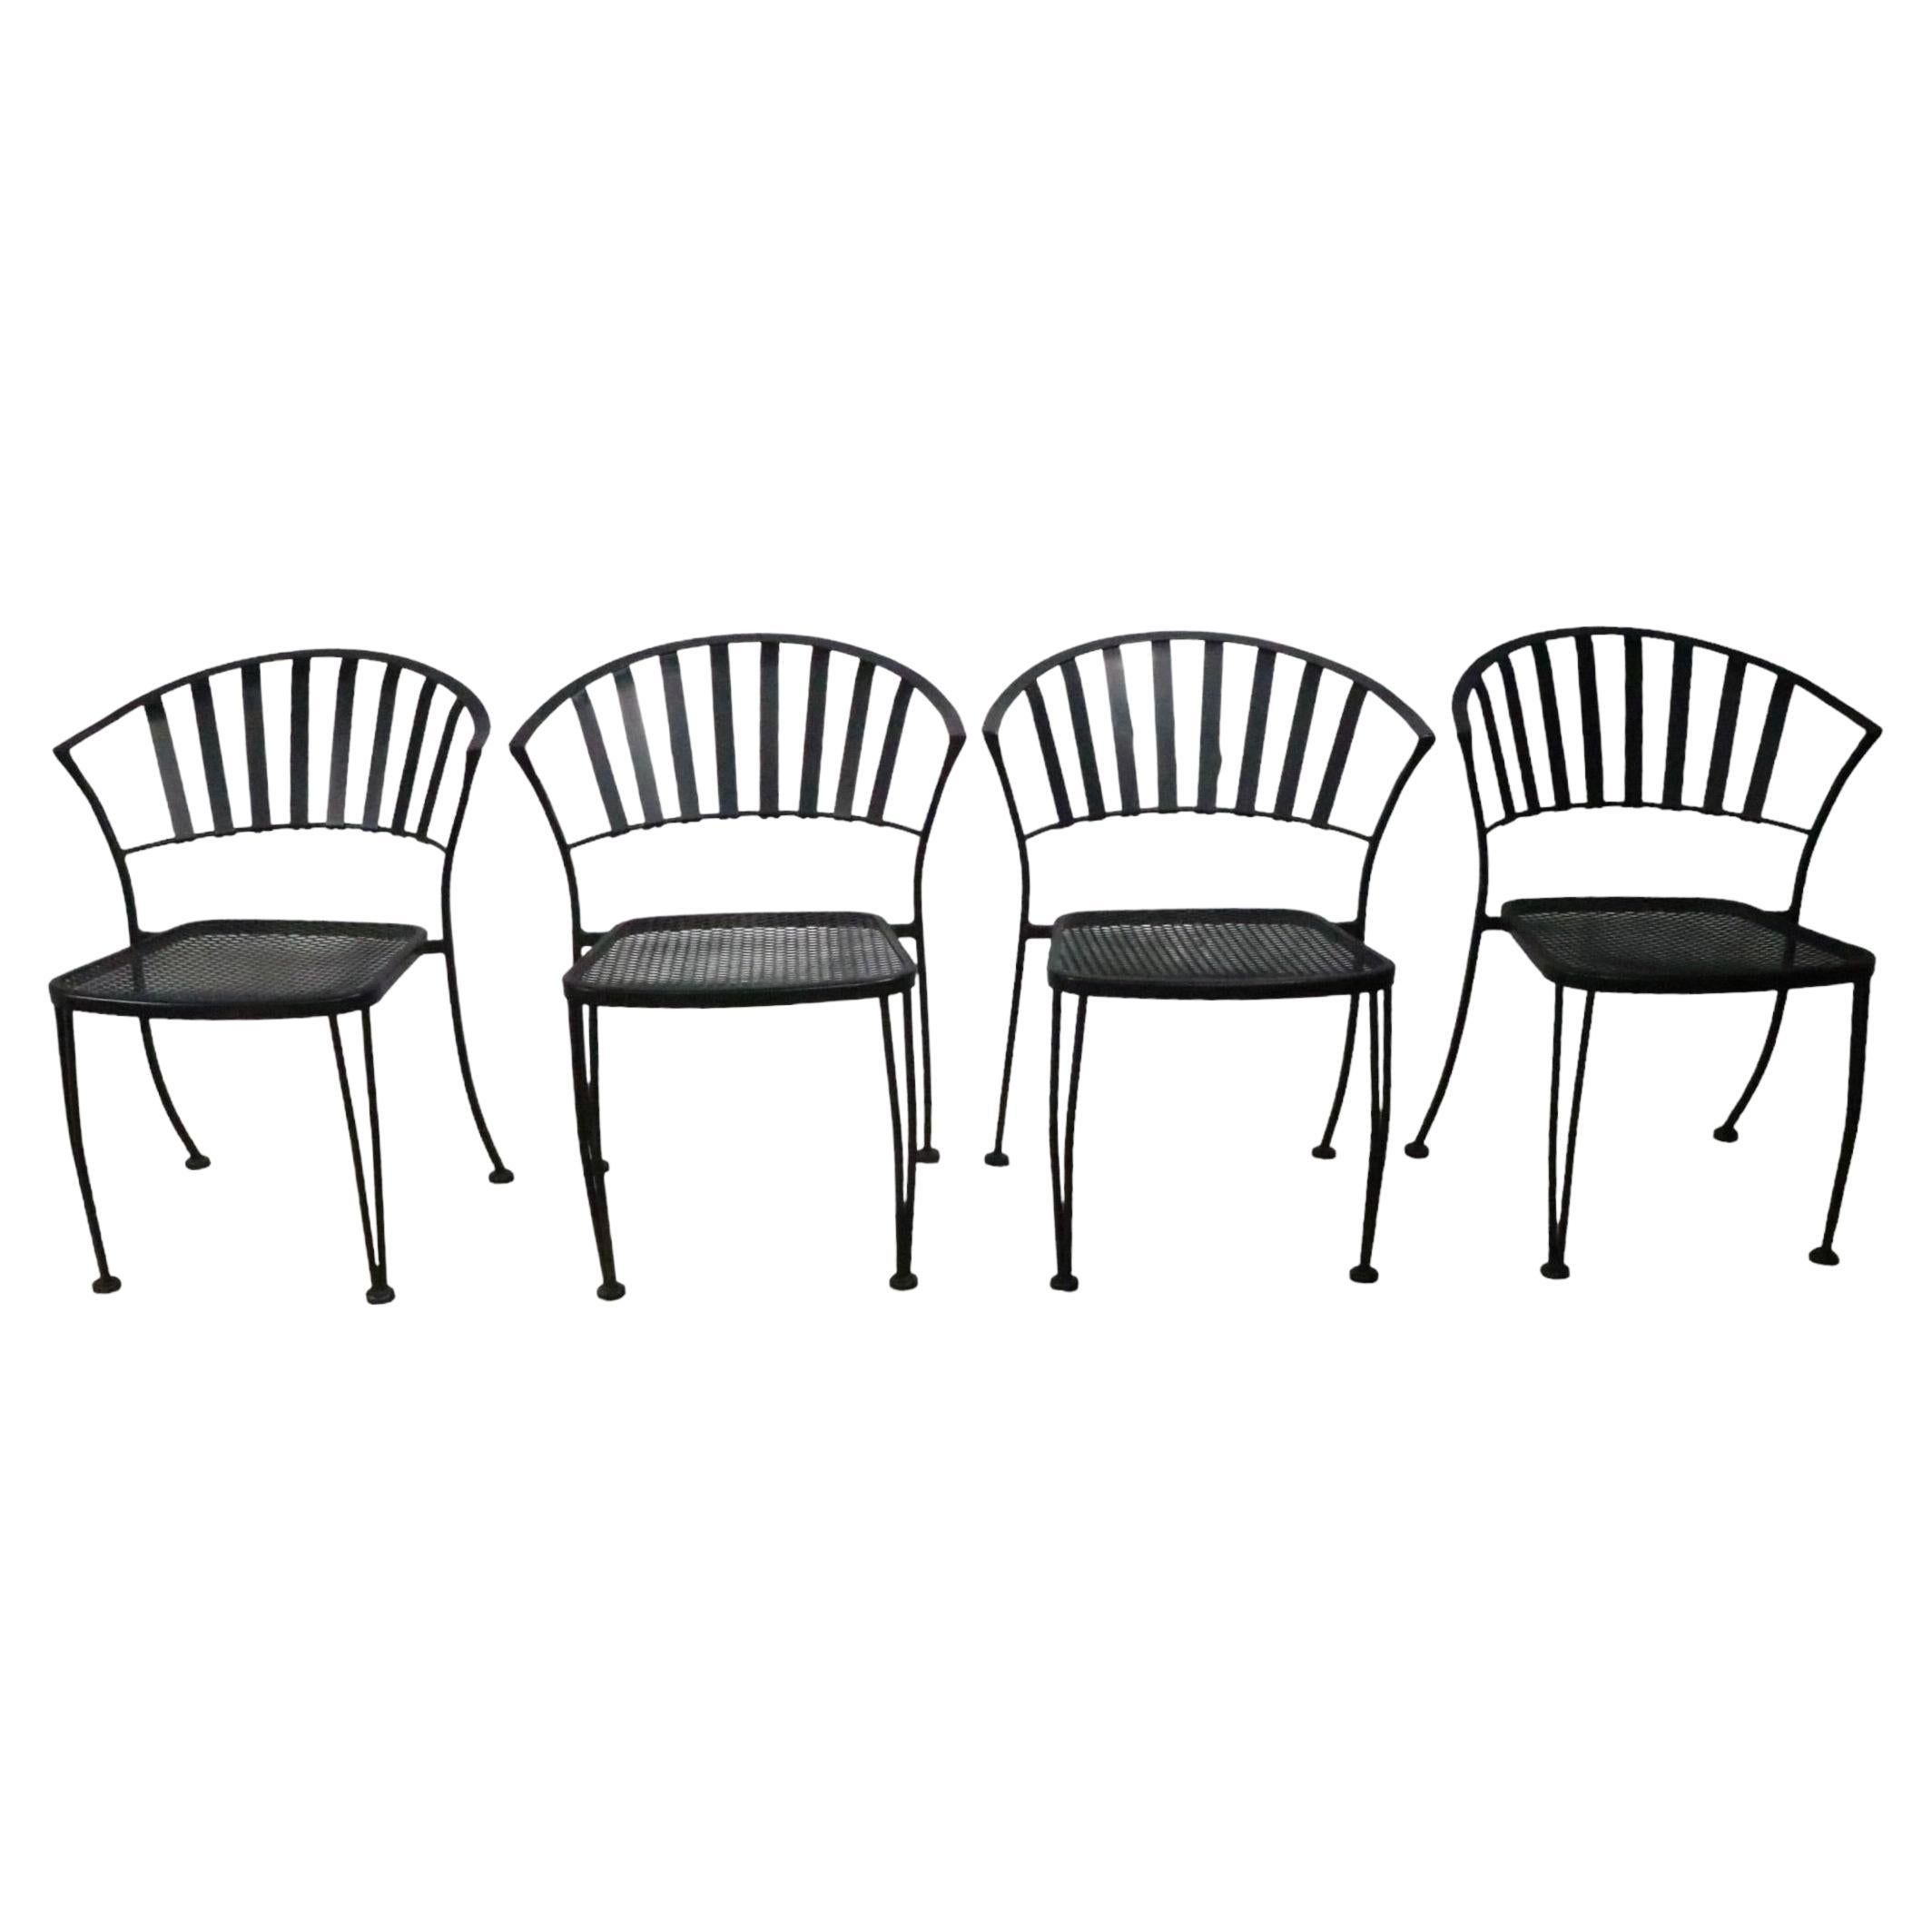 Set of Four Vintage Garden Patio Poolside Metal Strap Dining Chairs For Sale